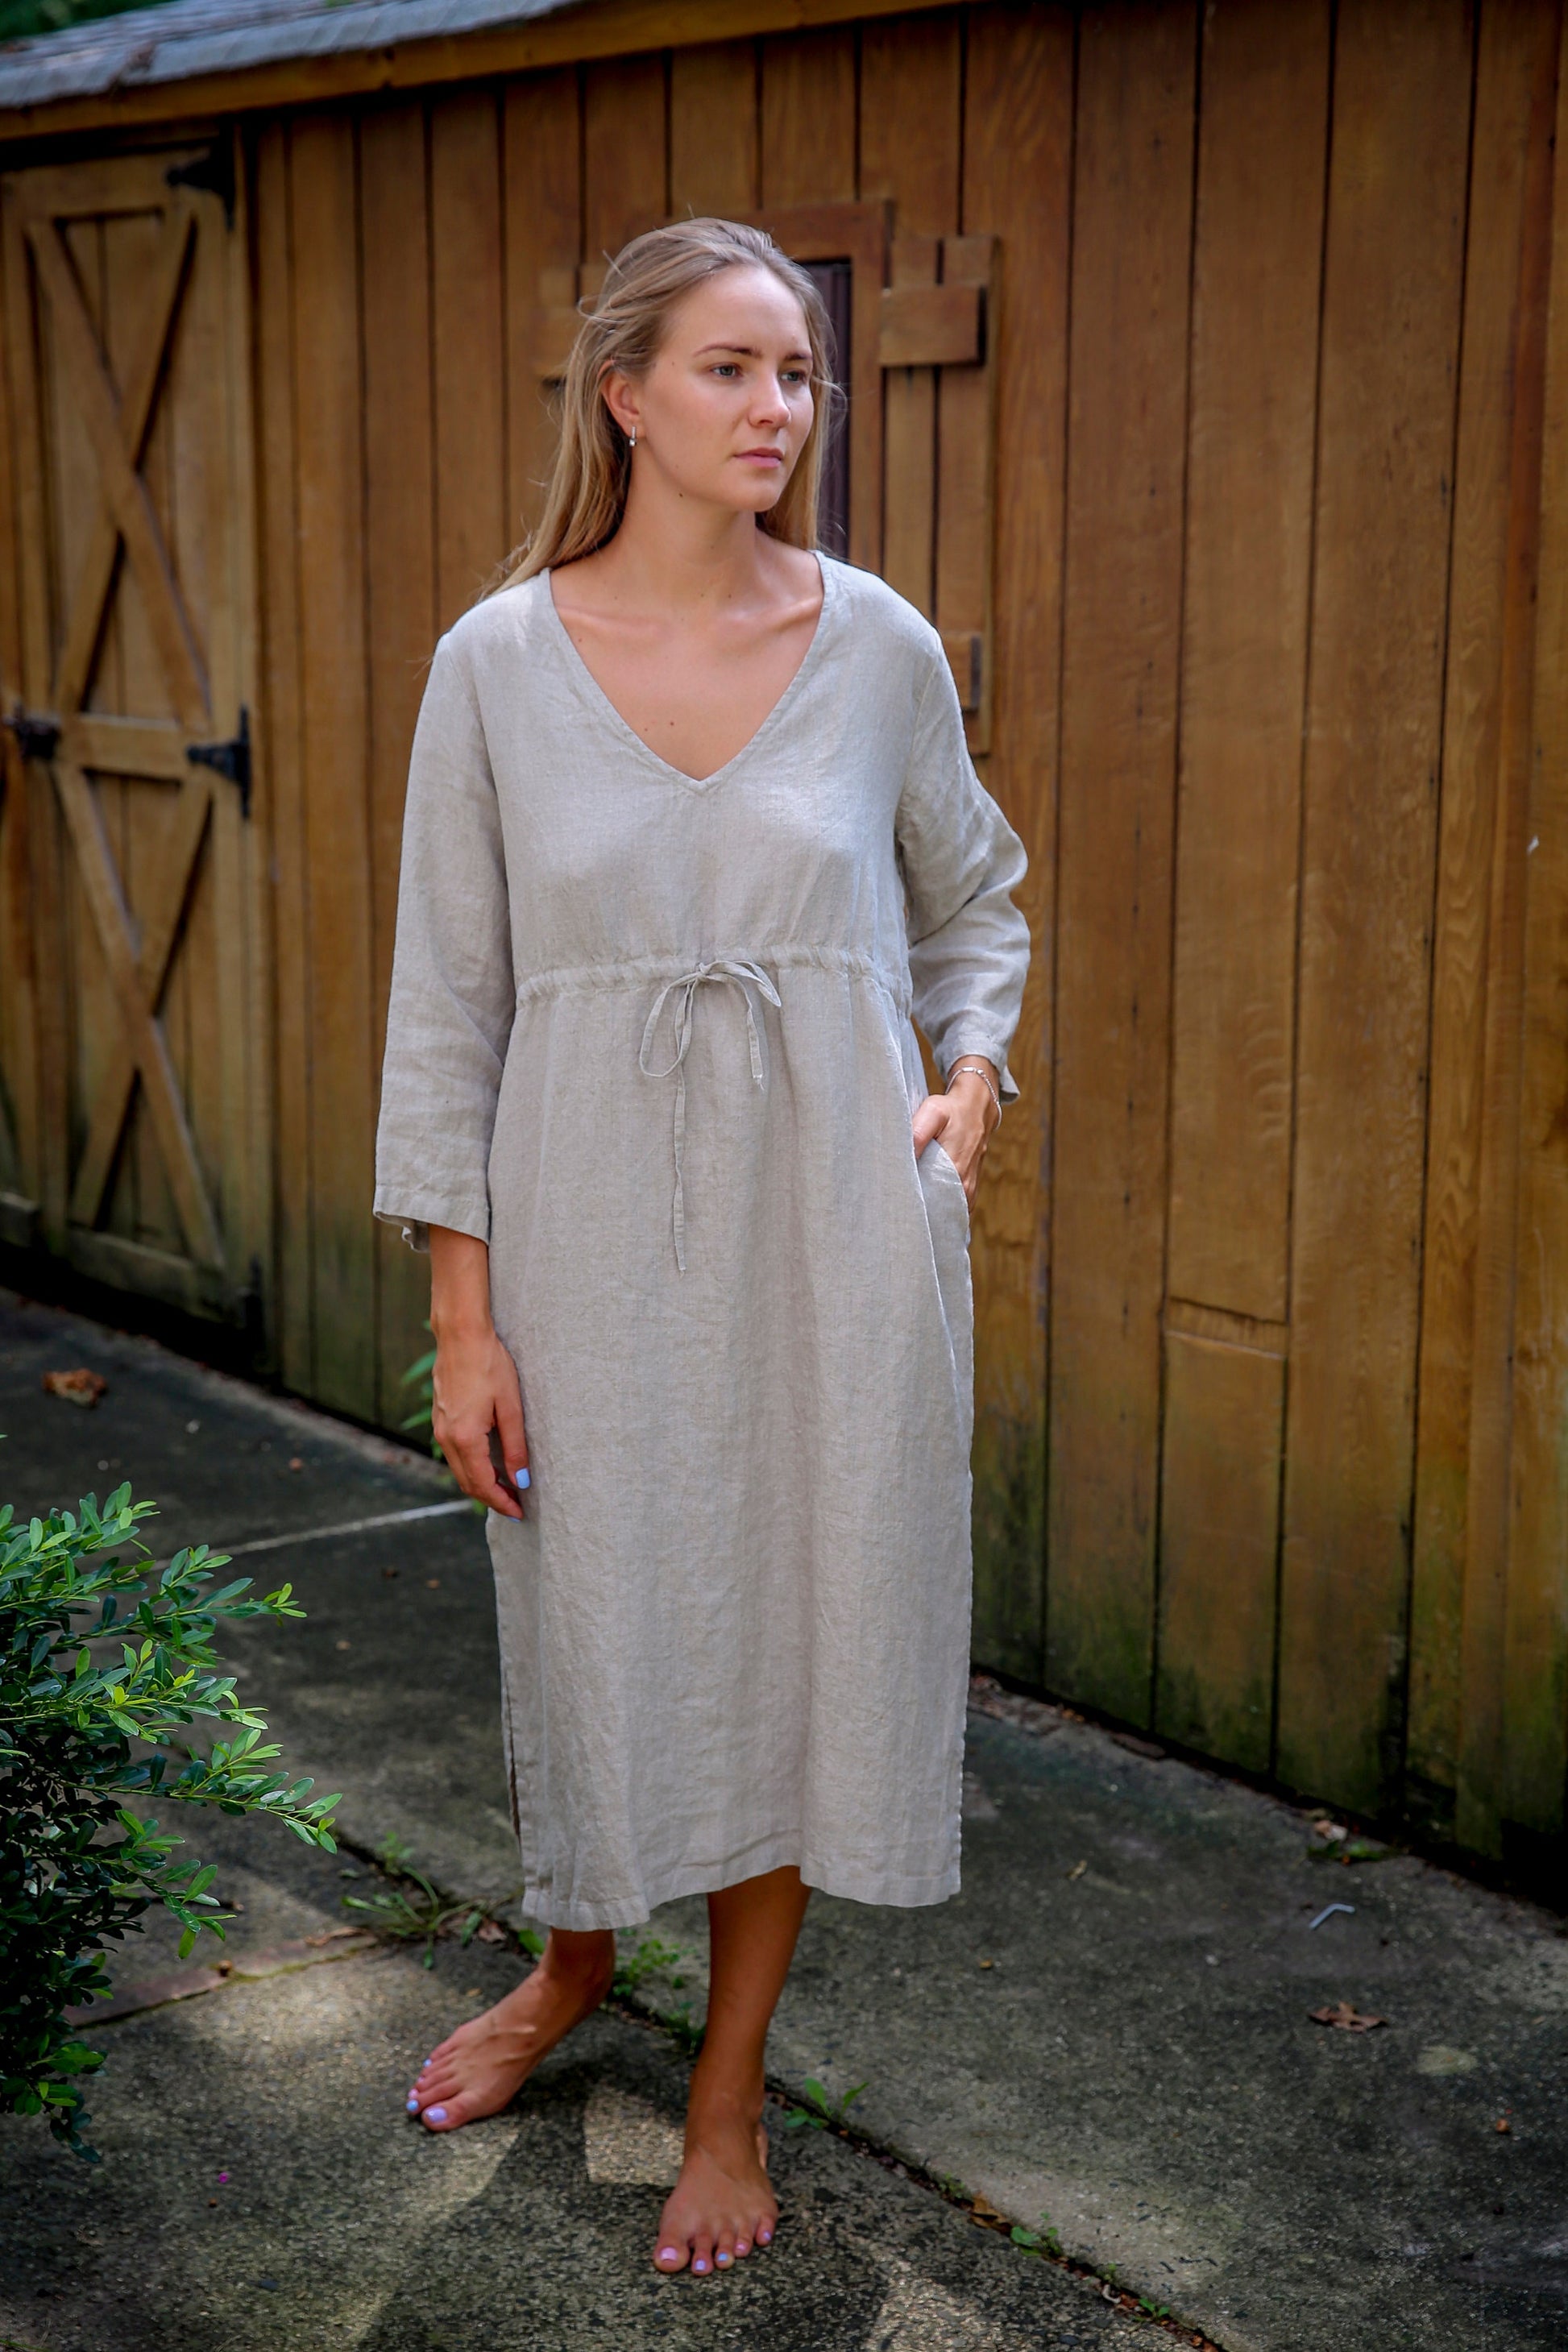 Soft and comfortable white linen dress with natural wrinkles.